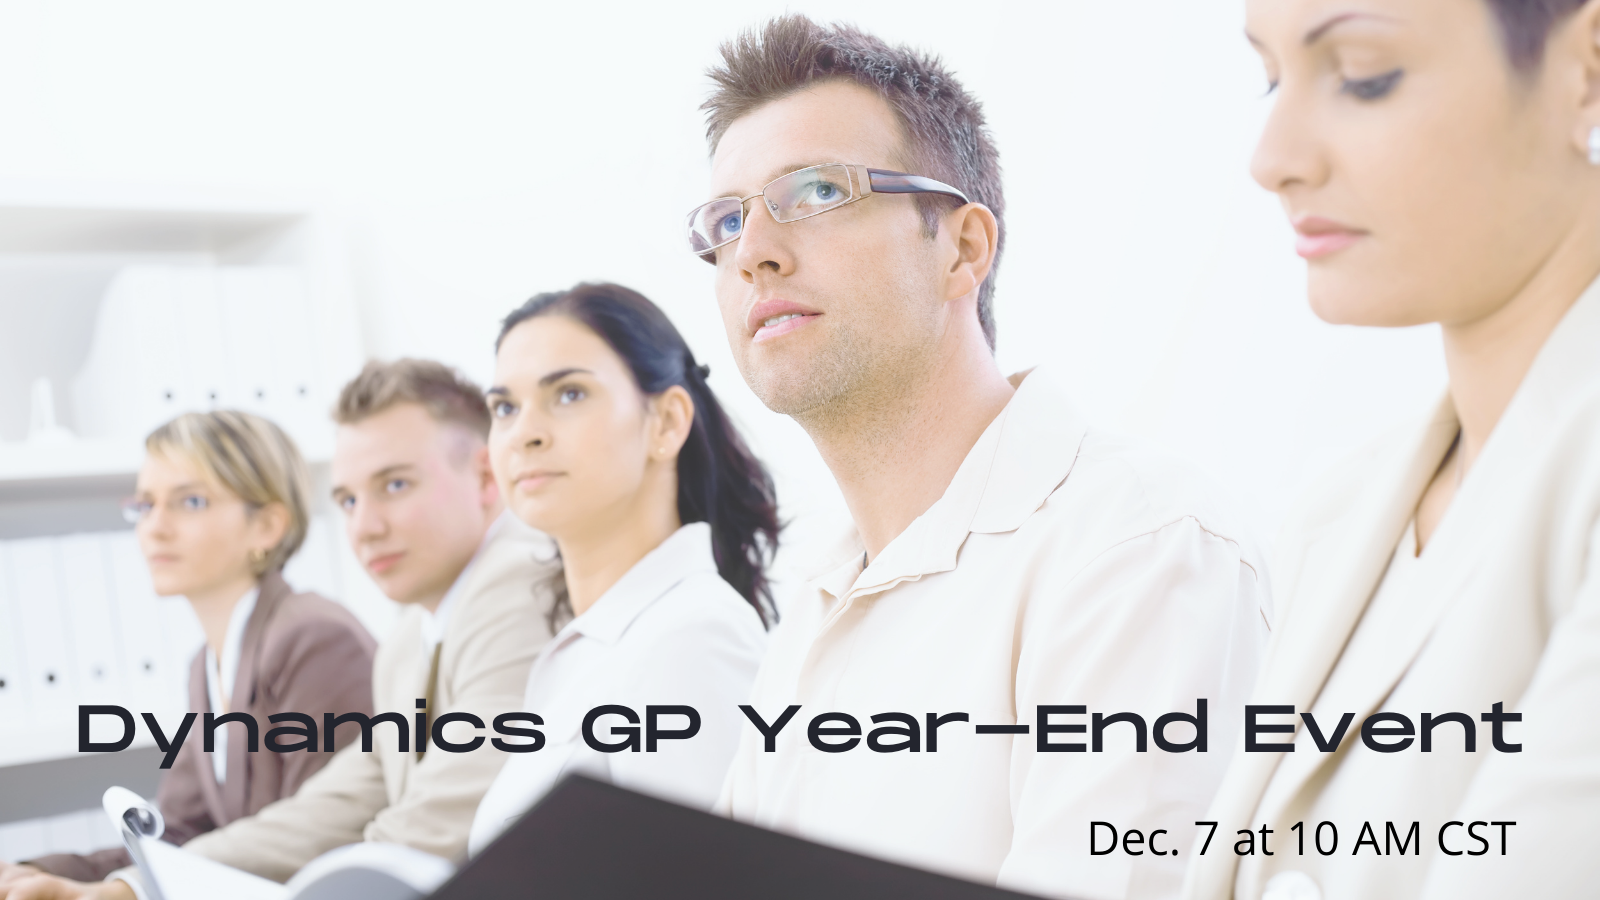 Dynamics GP year-end event promo